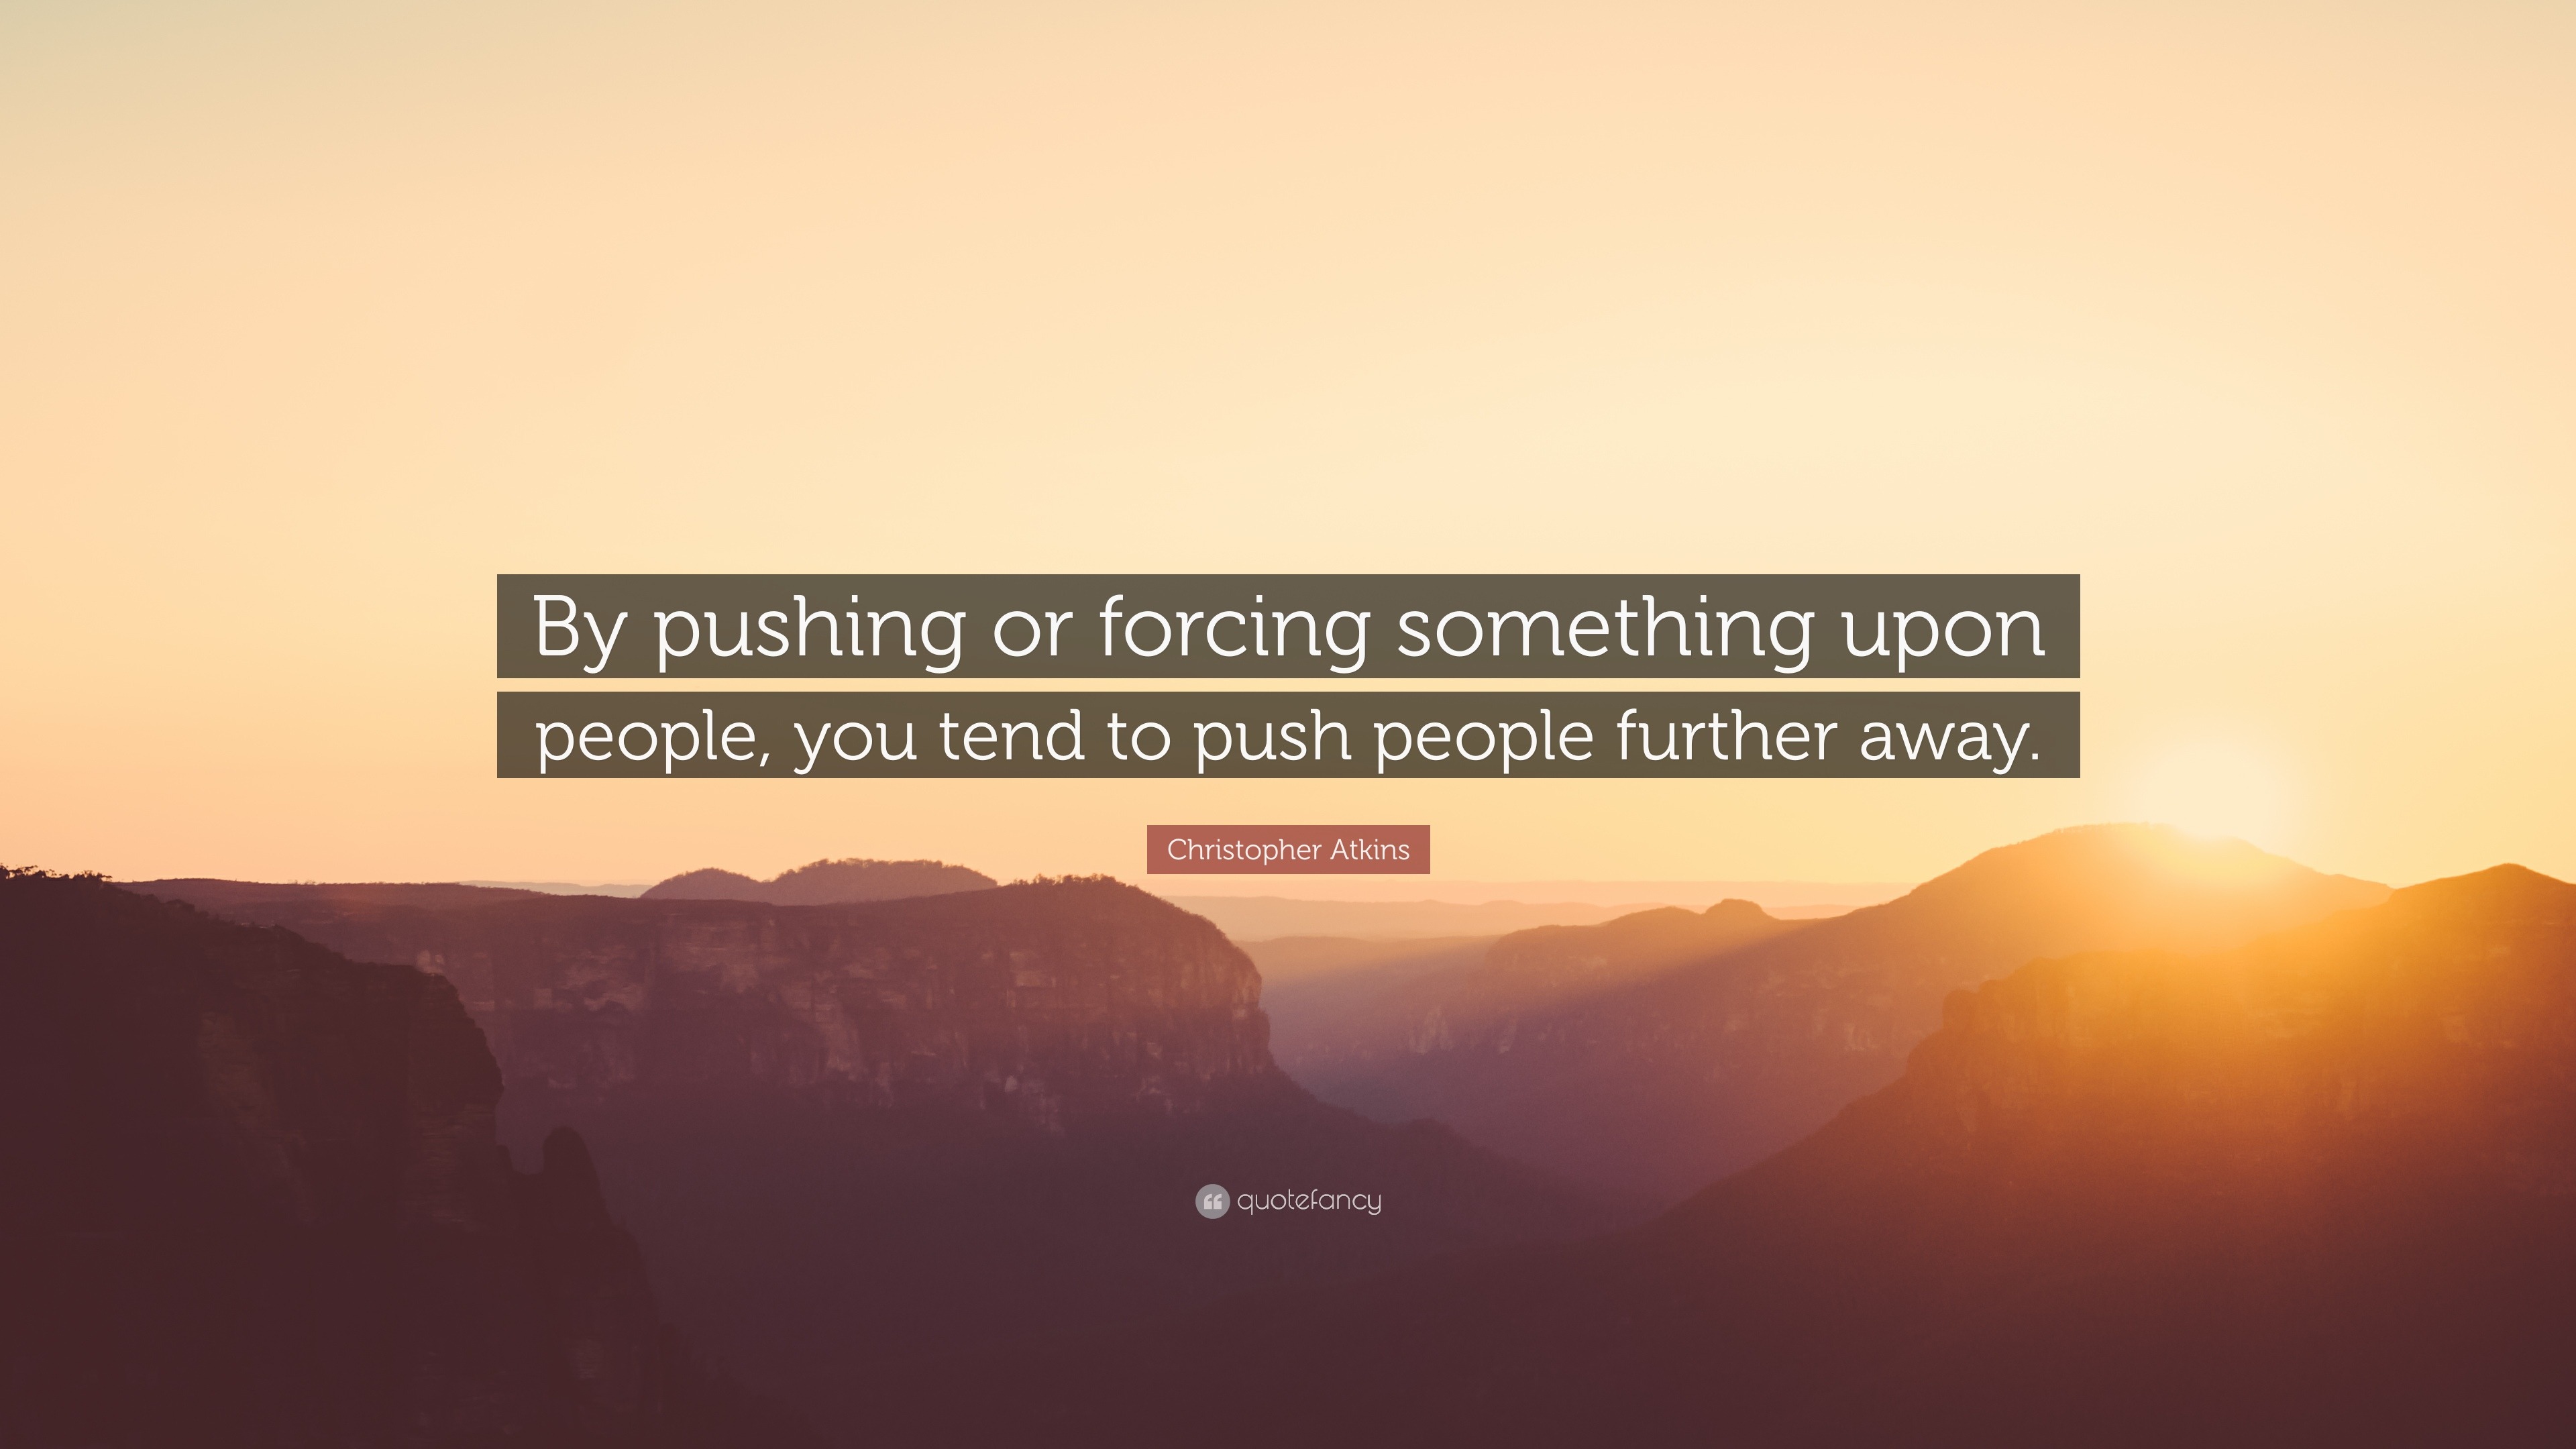 Christopher Atkins Quote: “By Pushing Or Forcing Something Upon People, You Tend To Push People Further